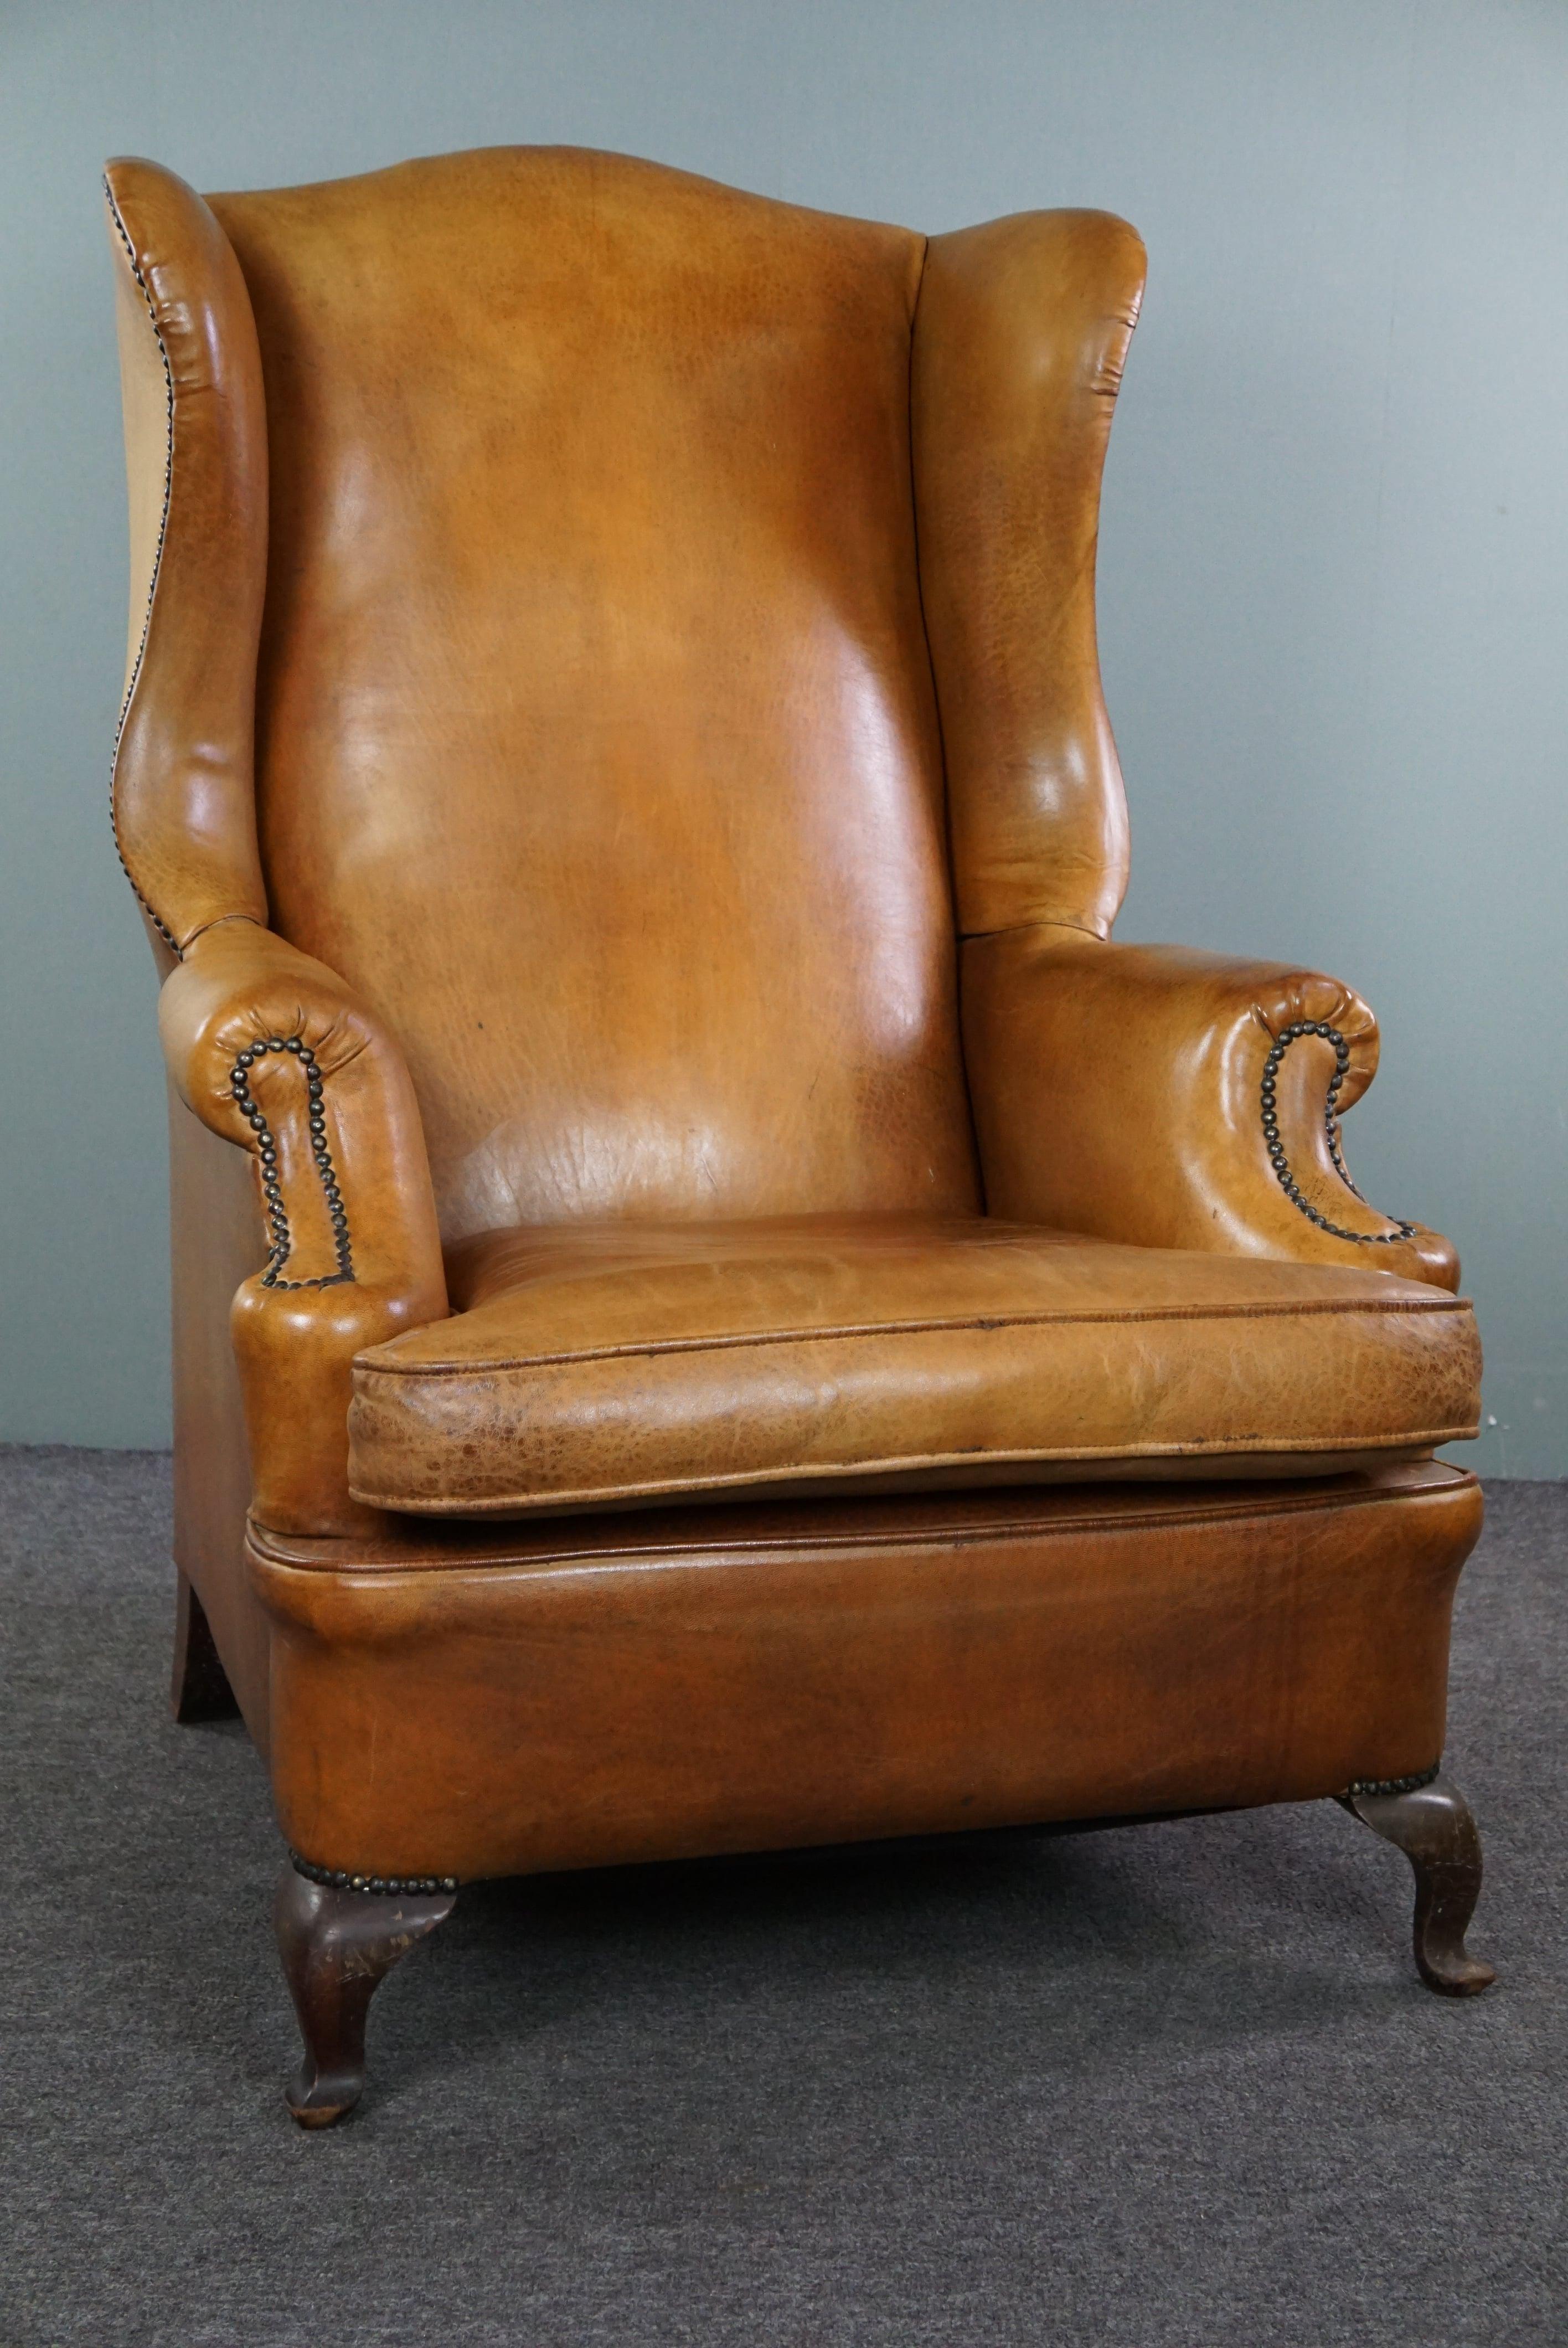 Offered is this graceful old wing chair made of sheep leather in correct condition, finished with decorative nails and Queen Anne legs.

This armchair is a beautiful example of an elegant chair made of sheep leather. There are some minimal signs of